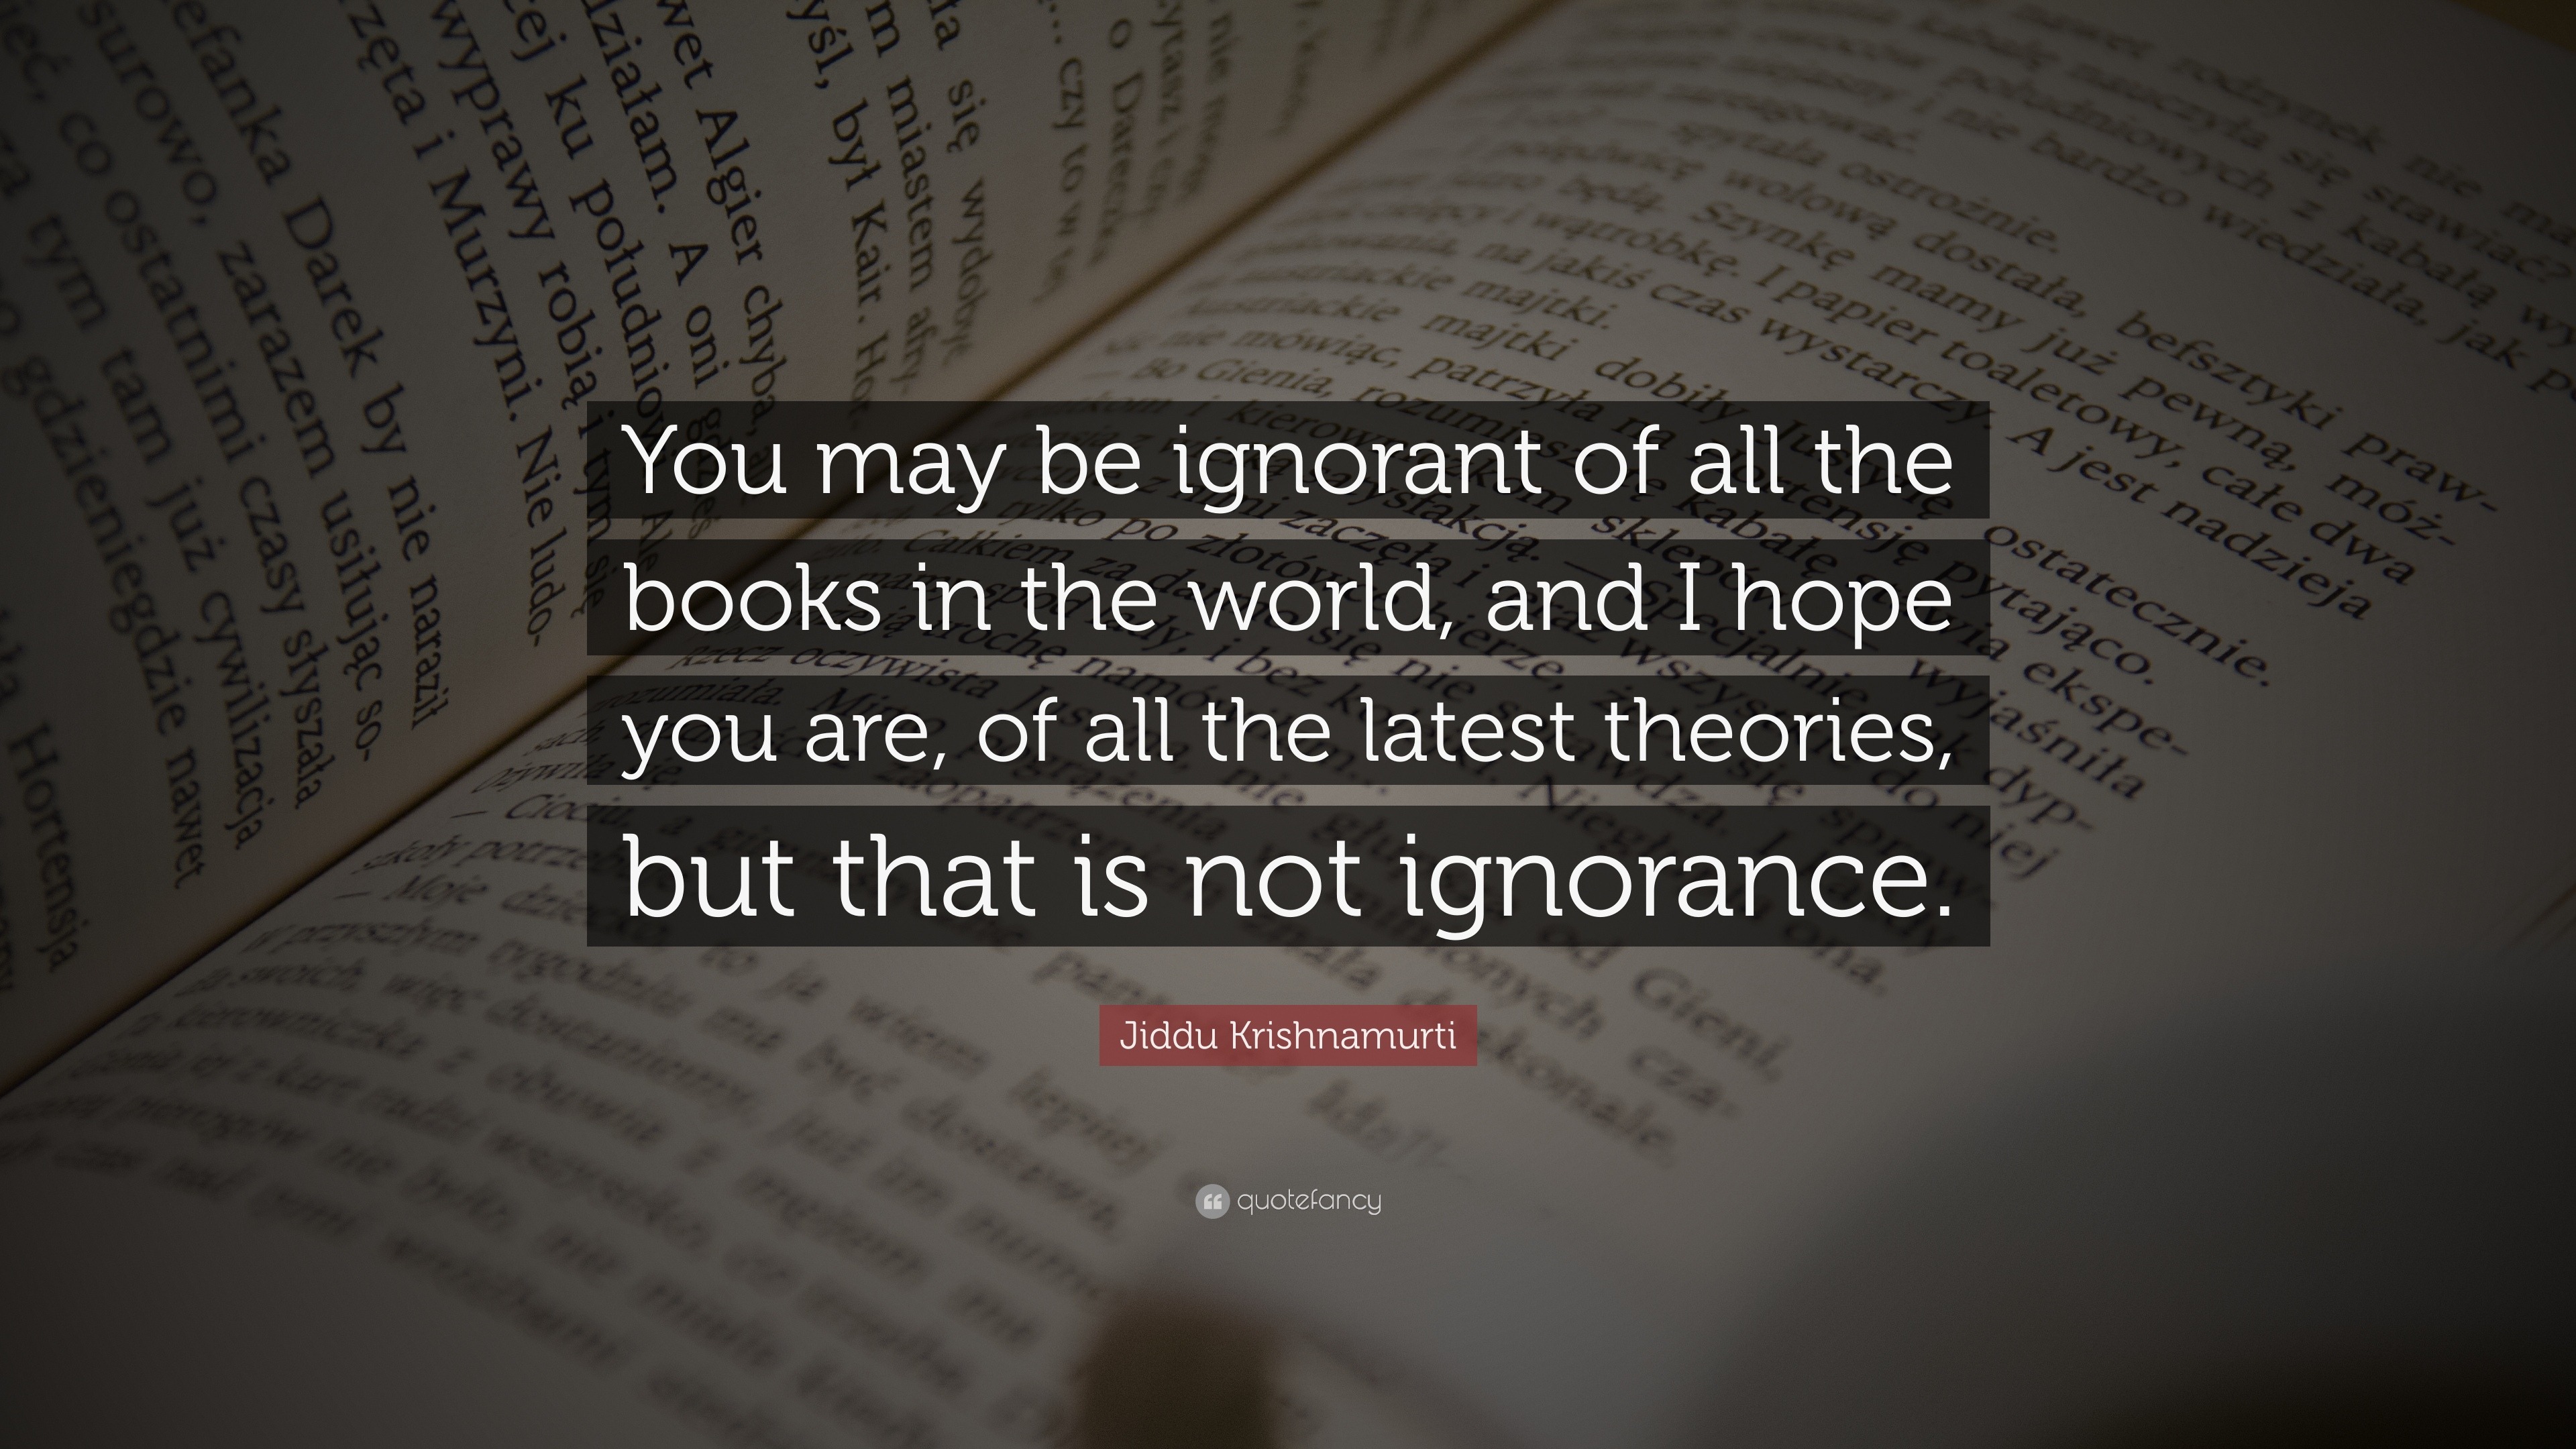 Jiddu Krishnamurti Quote: “You may be ignorant of all the books in the ...